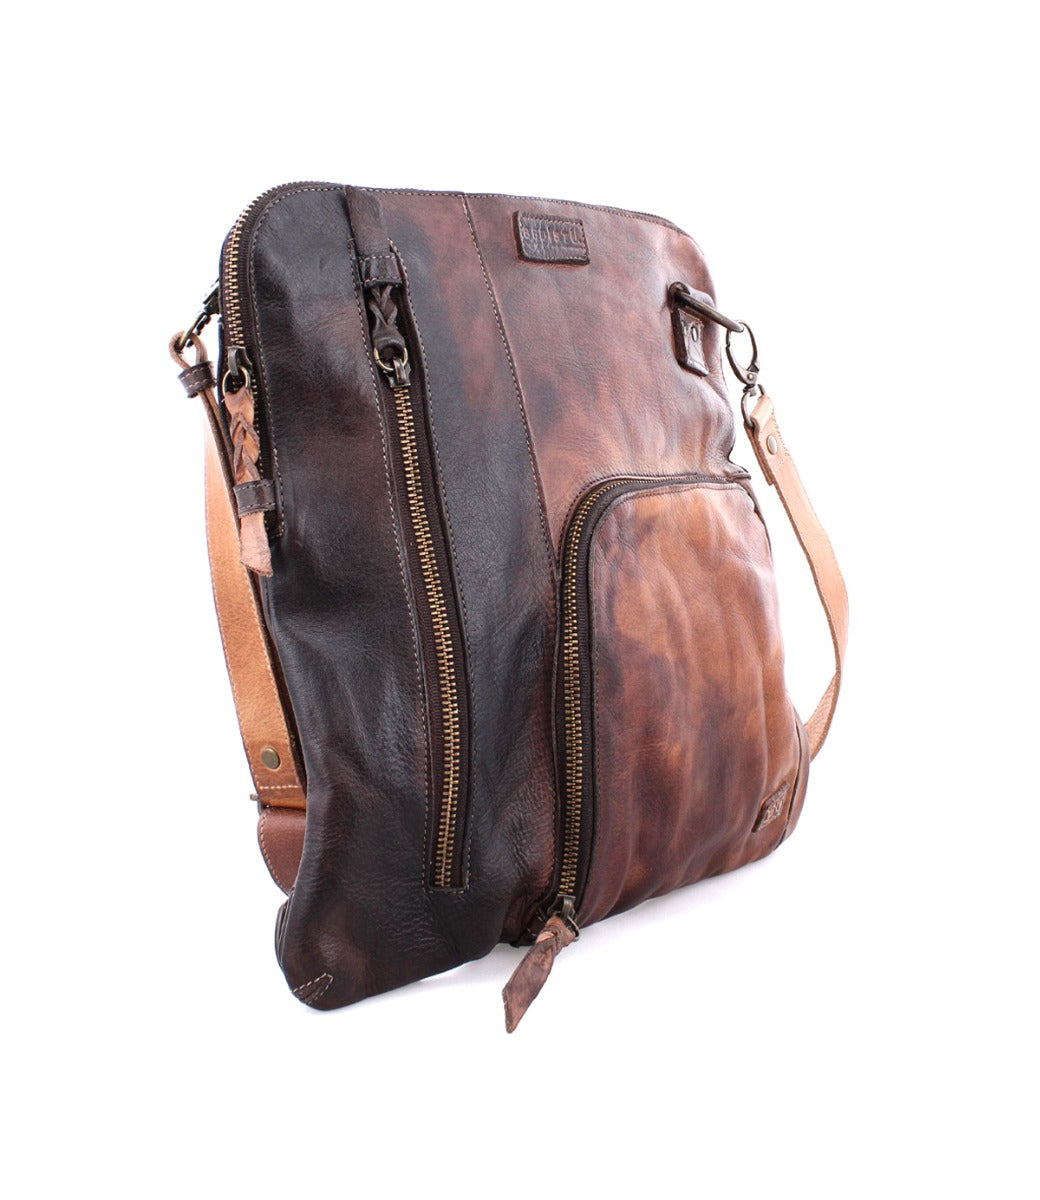 A Bed Stu Aiken brown leather crossbody bag with two straps.